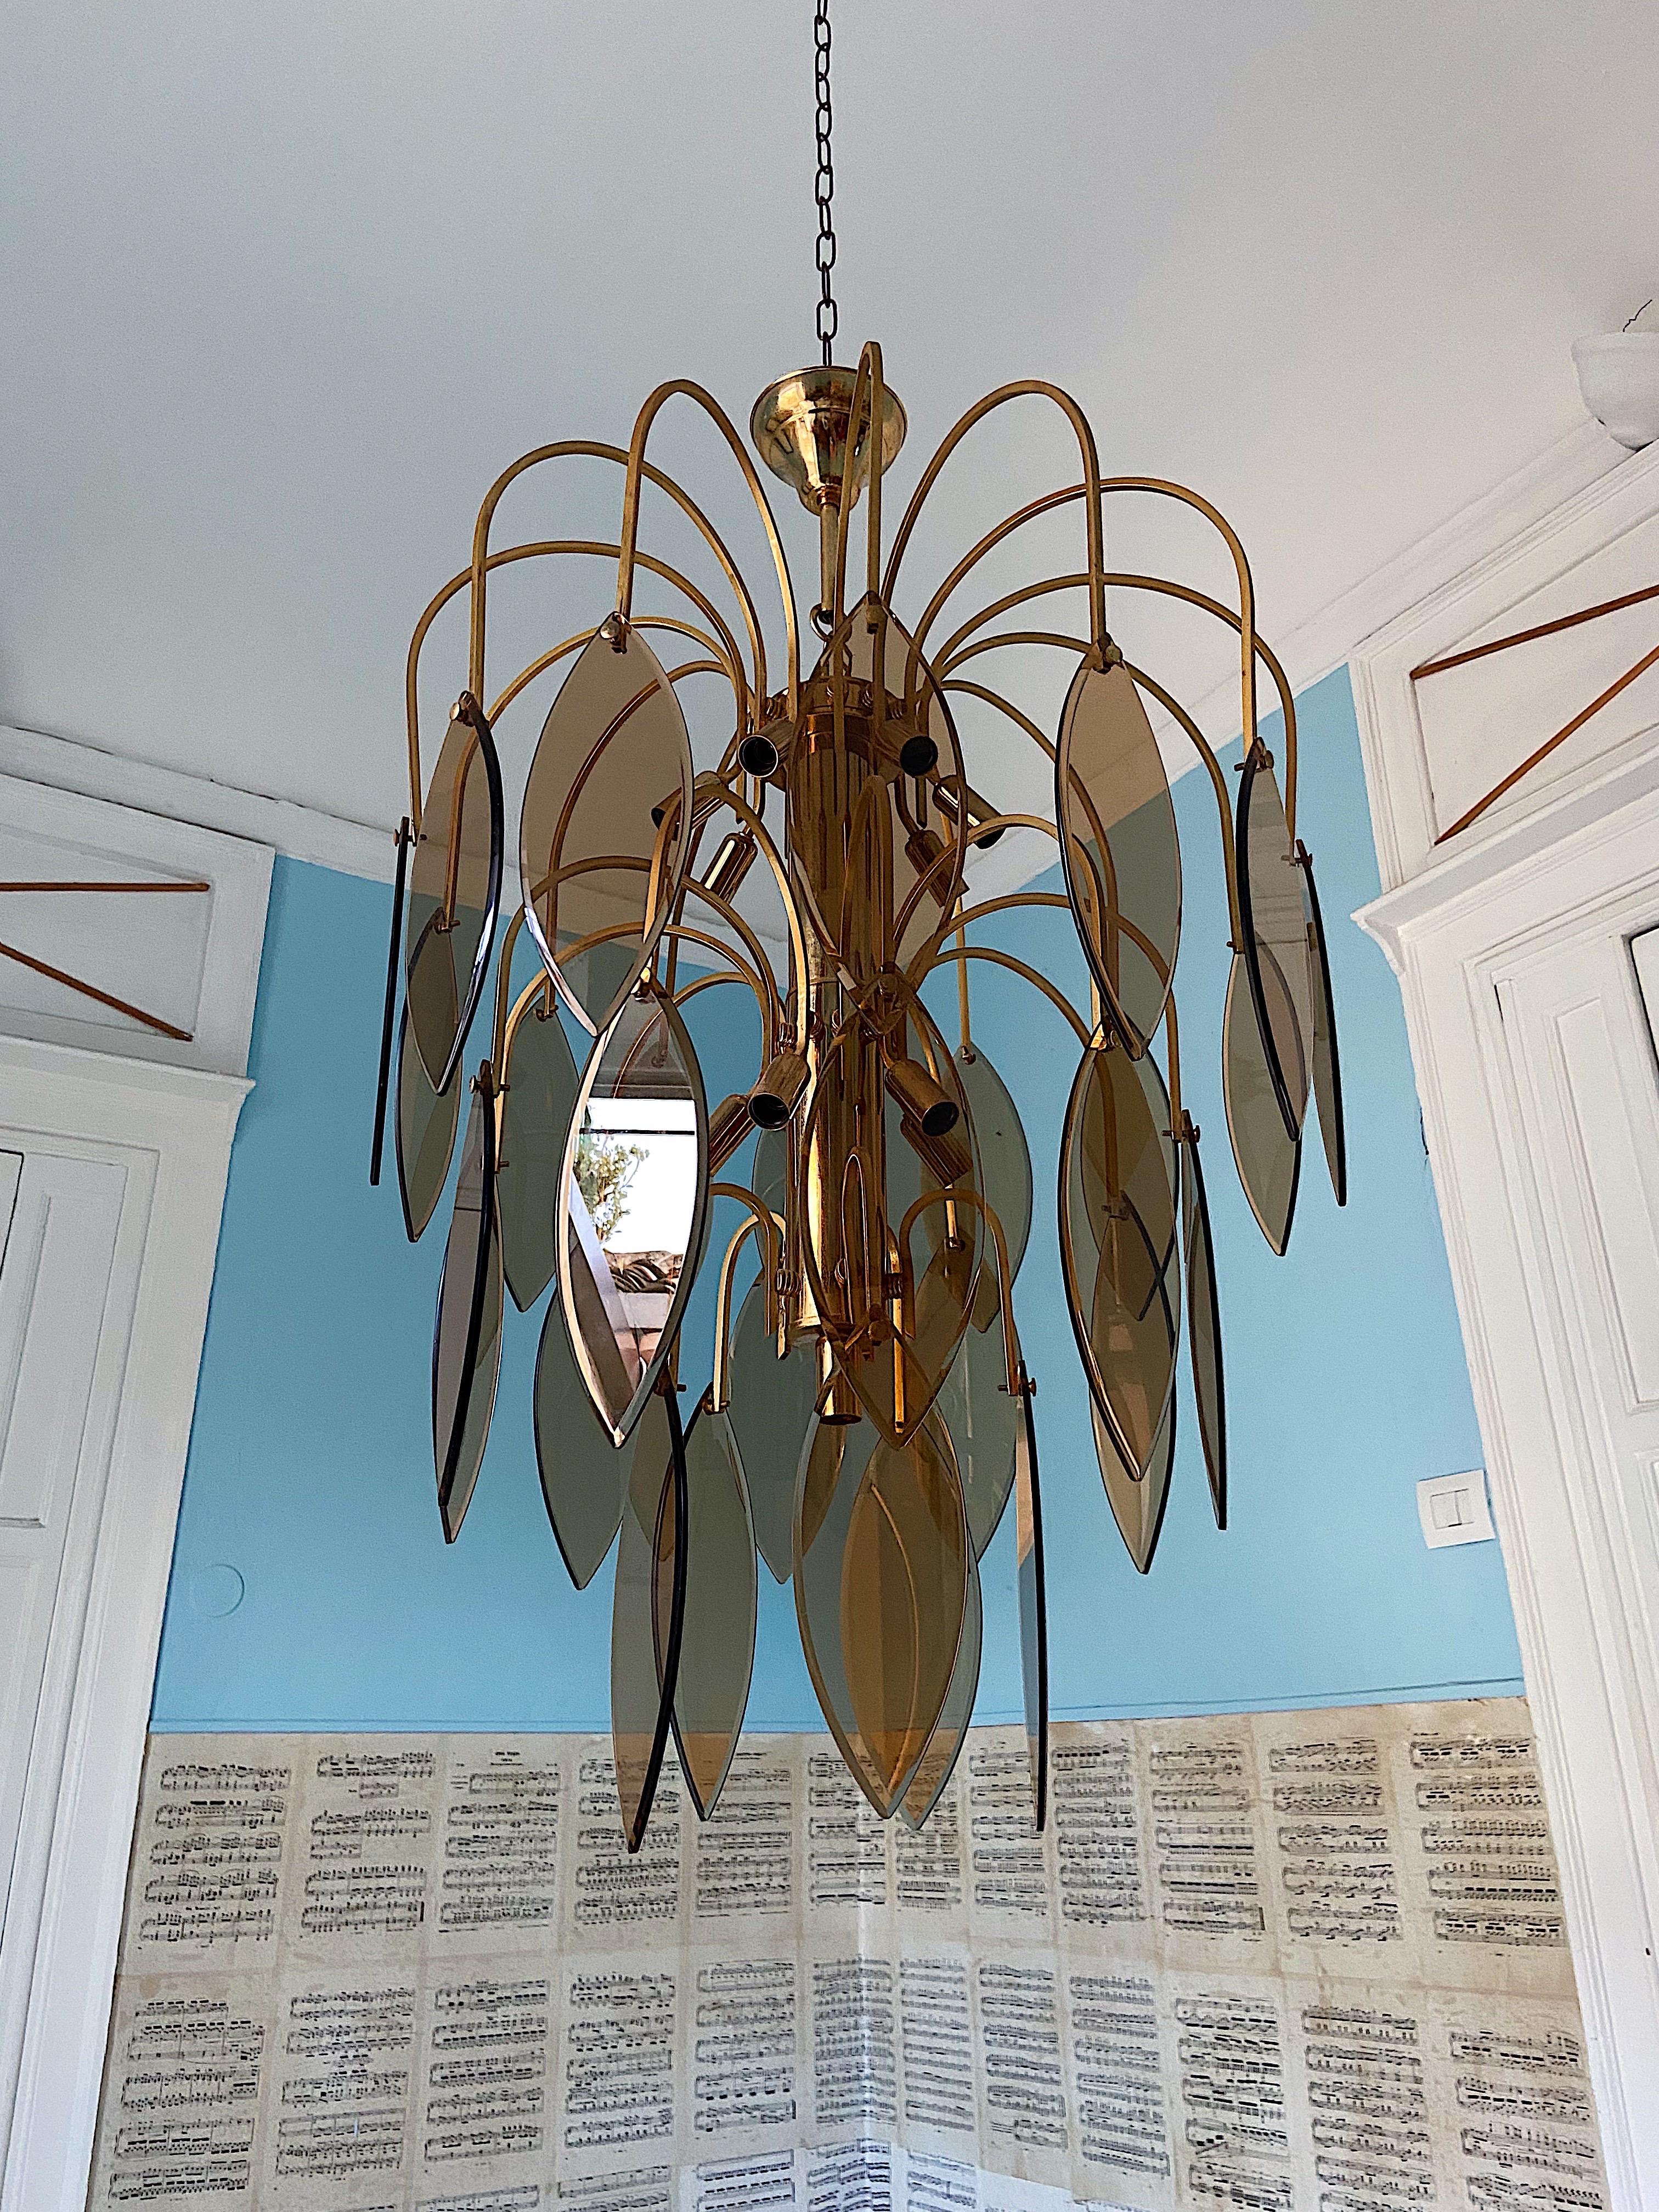 Gorgeous large scale Mid-Century Modern Murano glass chandelier with fume colored glass.
Featuring beautiful cascading leaf shaped glass.
The base has 3 tiers with 29 glass leafs and 13 light bulbs.
This piece is very rare and creates an